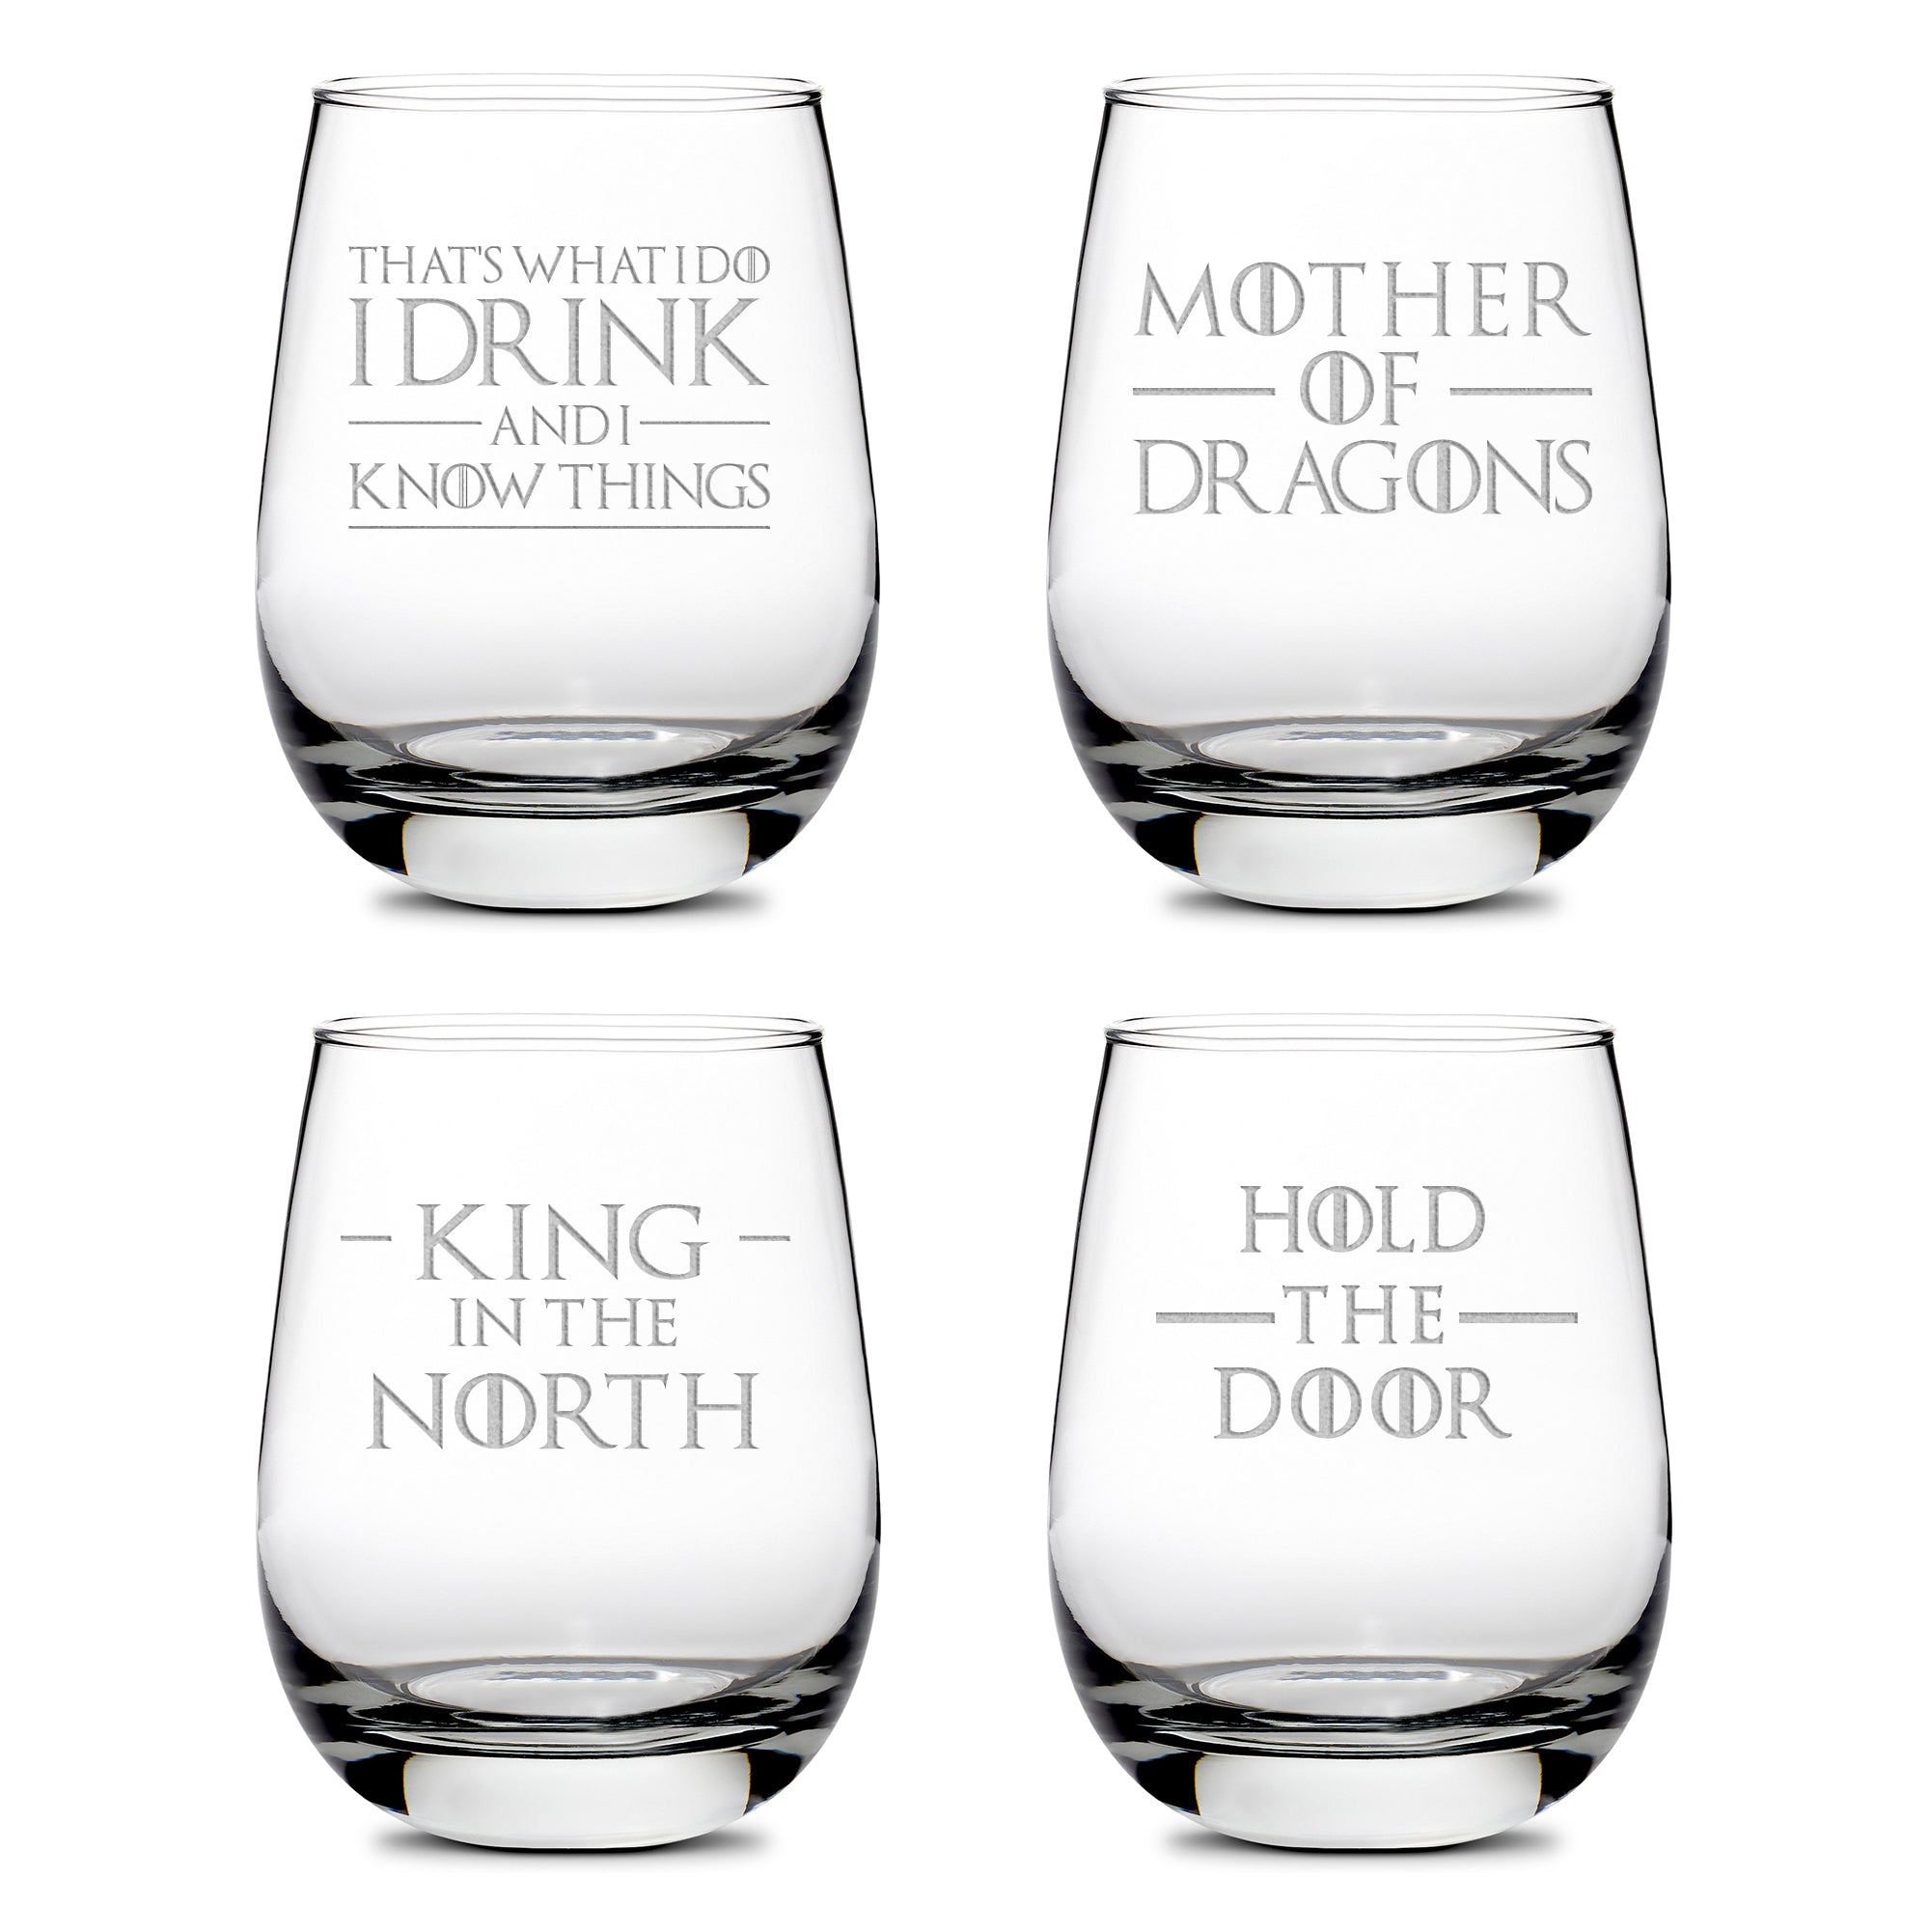 Premium Wine Glasses, Game of Thrones, I Drink and I Know Things, Mother of Dragons, King in the North, Hold the Door (Set of 4)